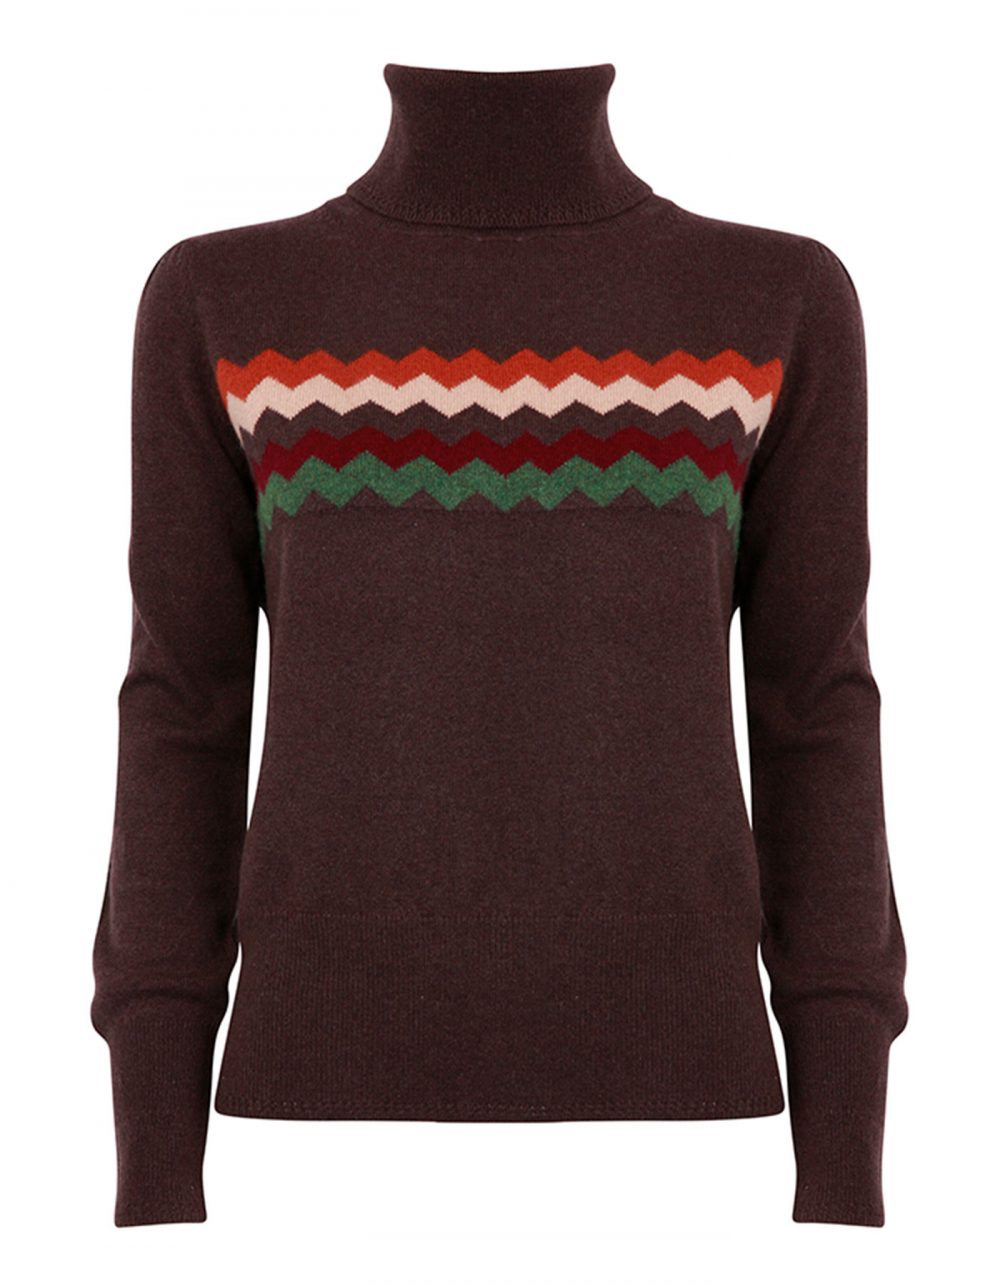 Image of malin darlin cashmere knitwear, the Zigzag chocolate cashmere jumper laid flat on a white background.